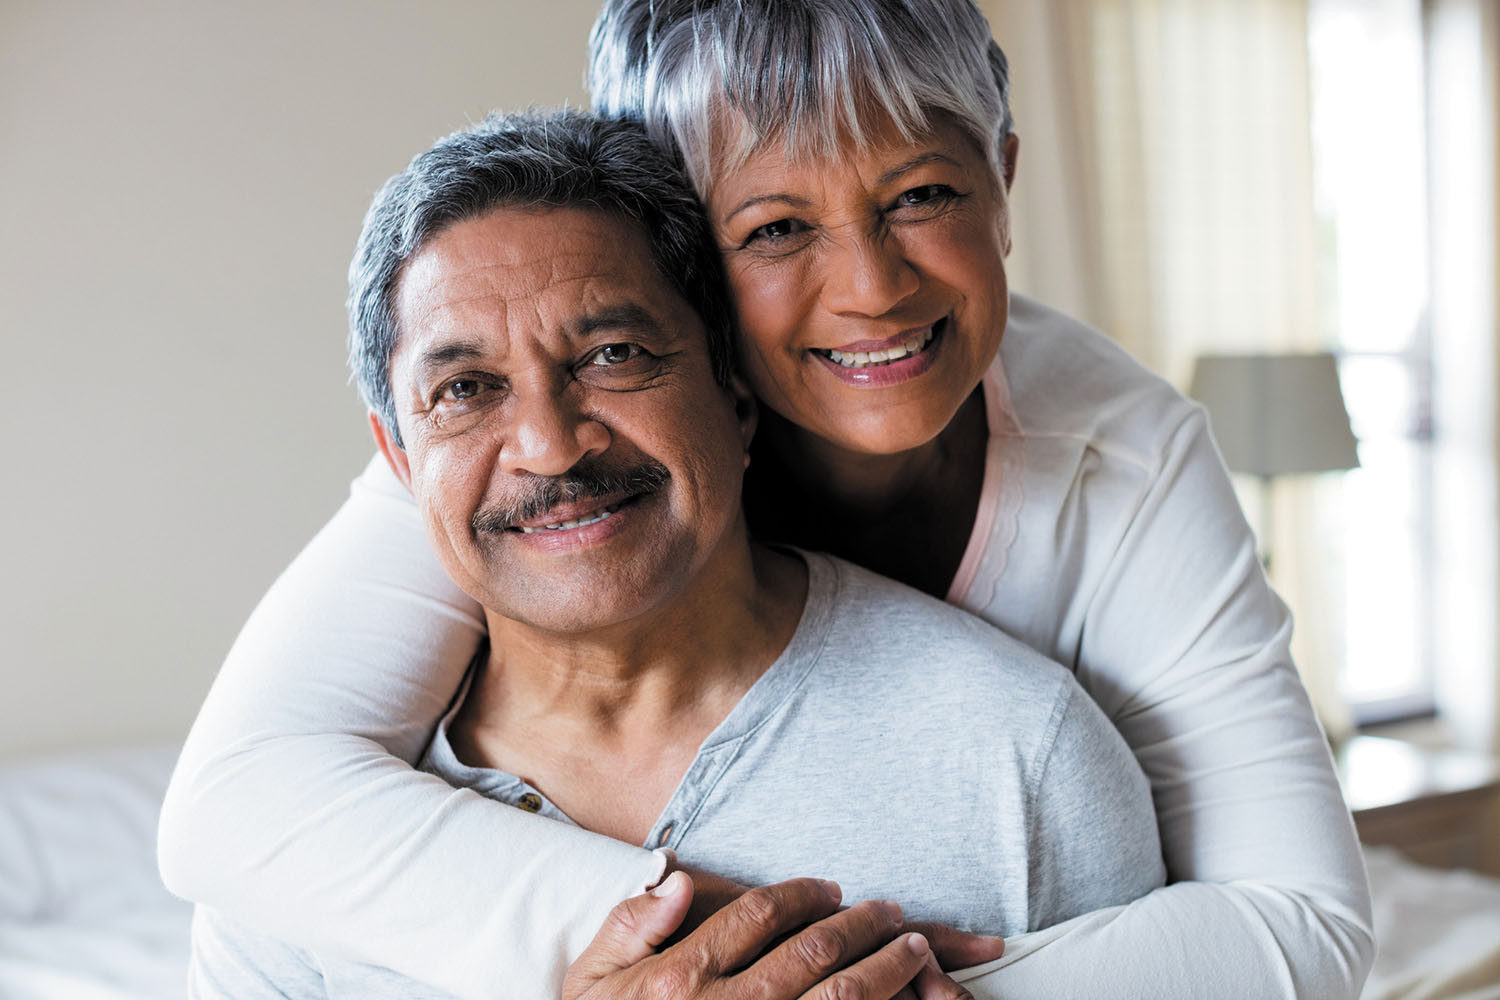 photo of a smiling mature couple, woman is standing behind sitting man and has her arms around his shoulders and chest